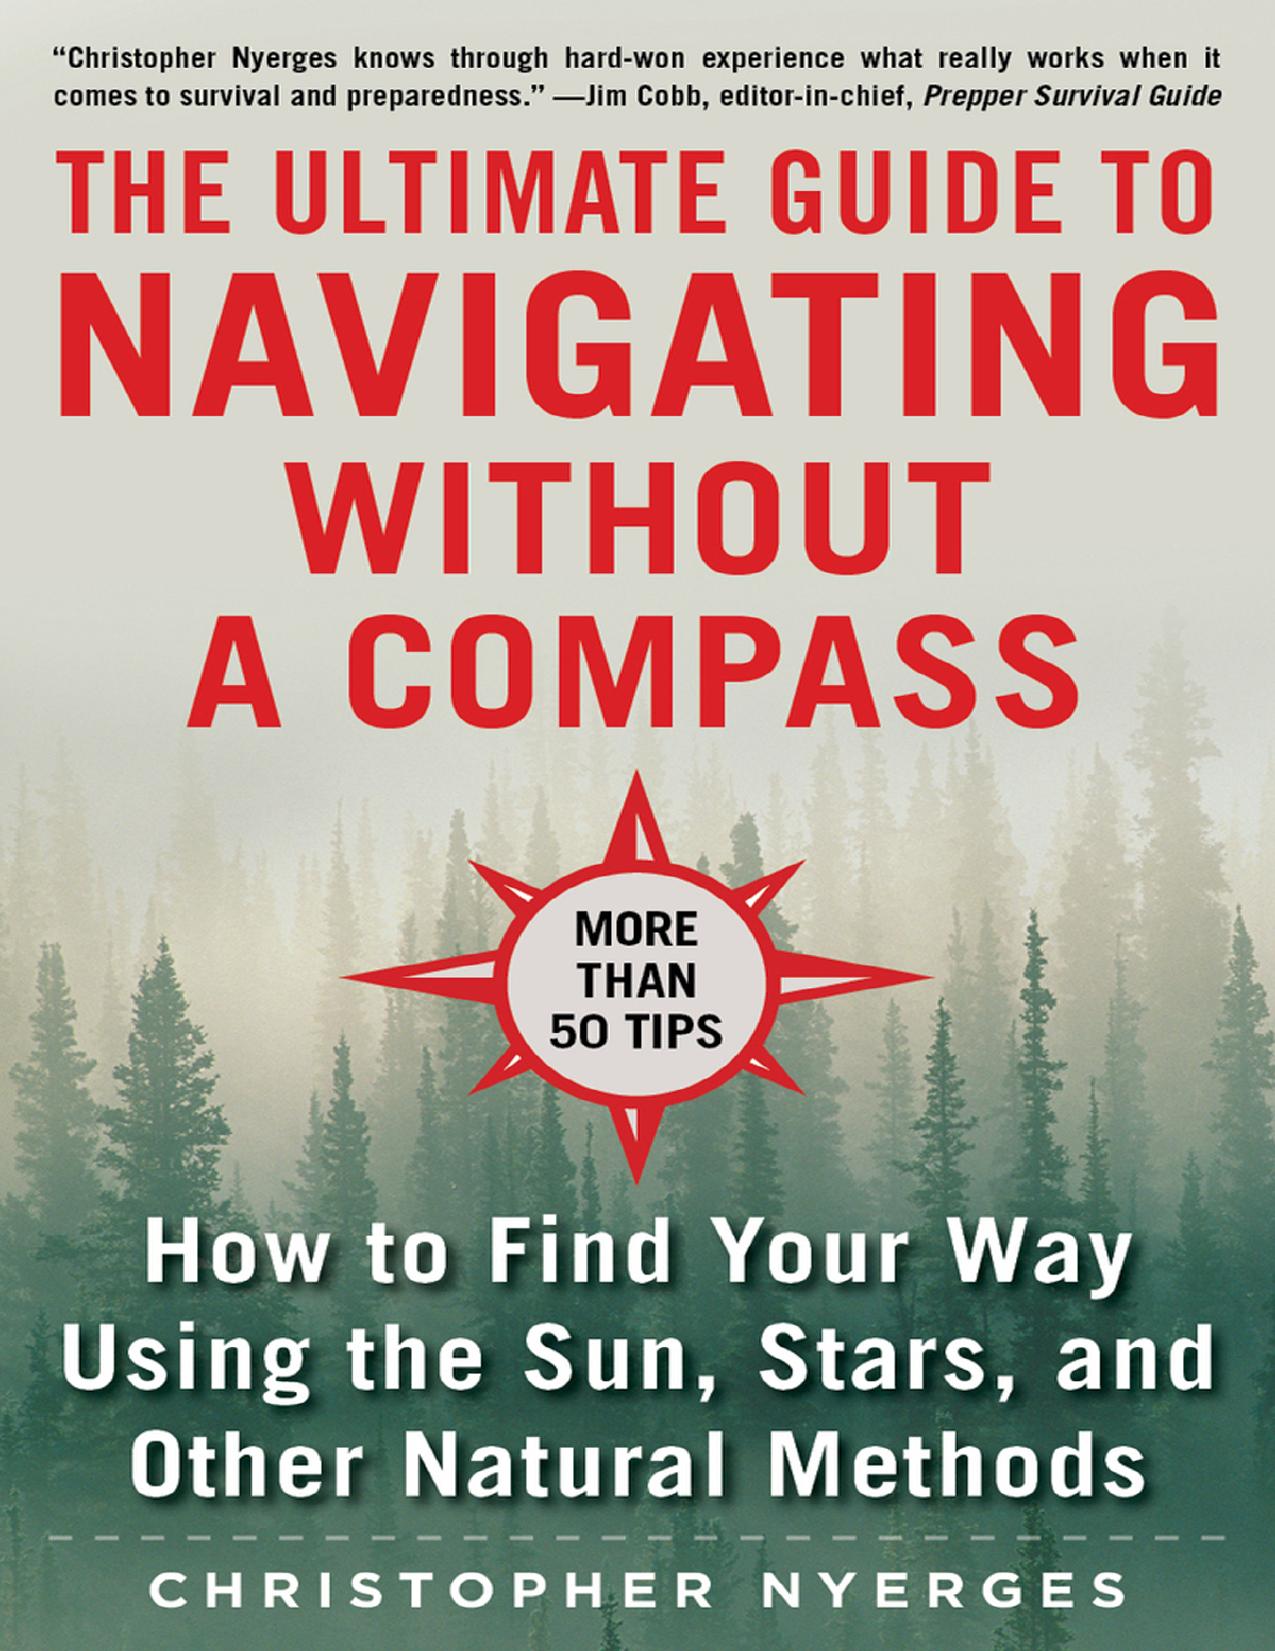 The Ultimate Guide to Navigating without a Compass by Christopher Nyerges